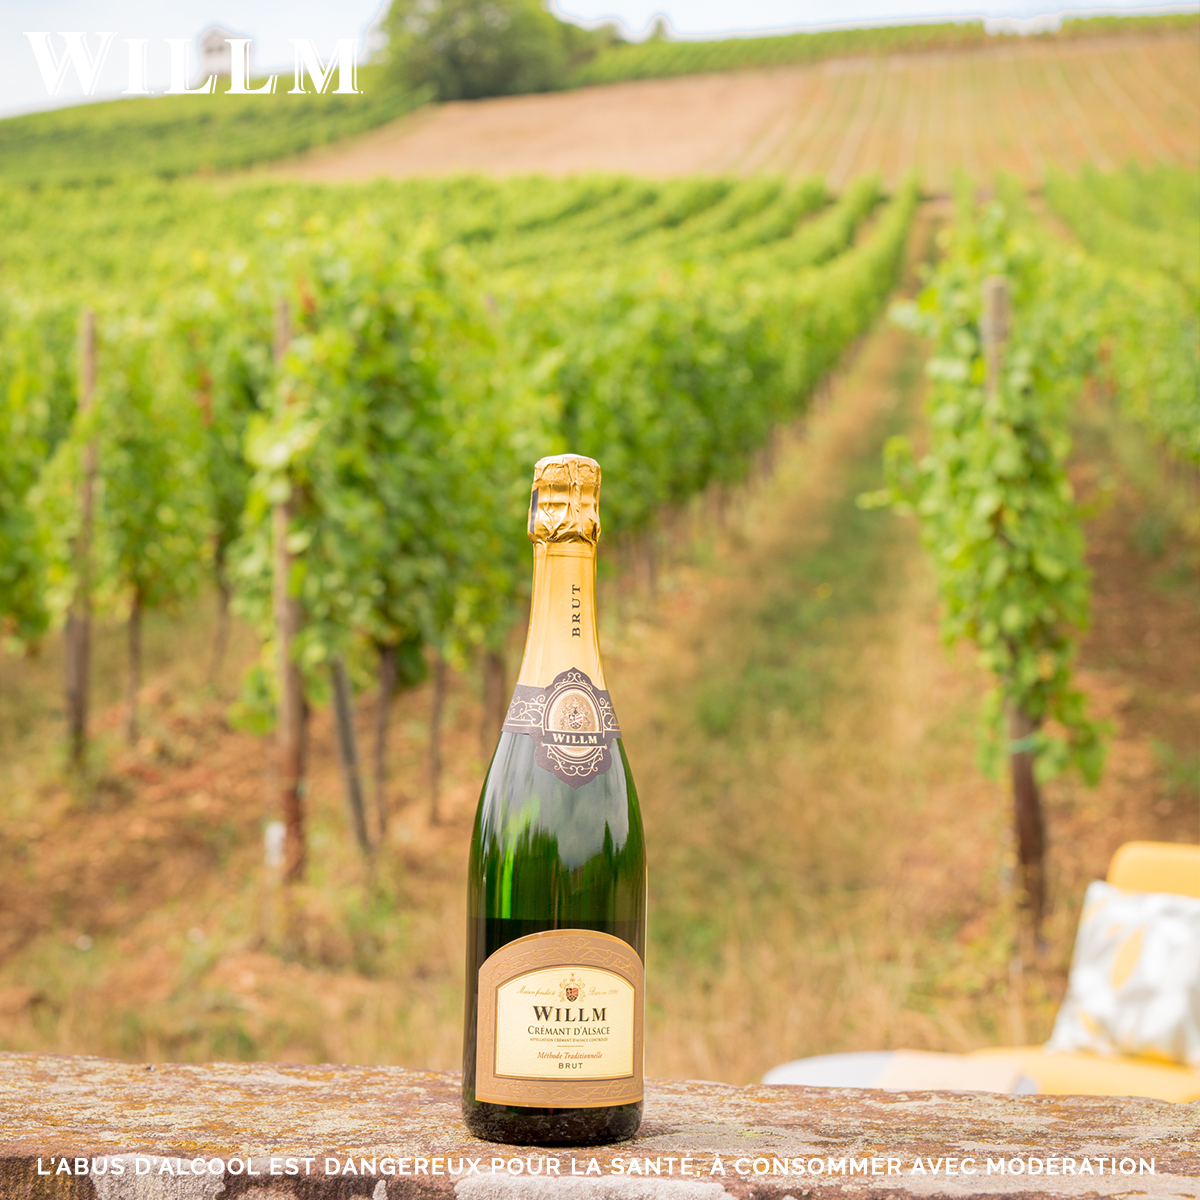 Let’s start 2021 with bubbles! Rediscover our classic, the Crémant d'Alsace Brut! Fresh, crisp and festive, this Crémant d'Alsace produced according the traditional method will surprise you with its expressive nose and vibrant palate. #drinkalsace #alsacerocks #alsacewillm #2021